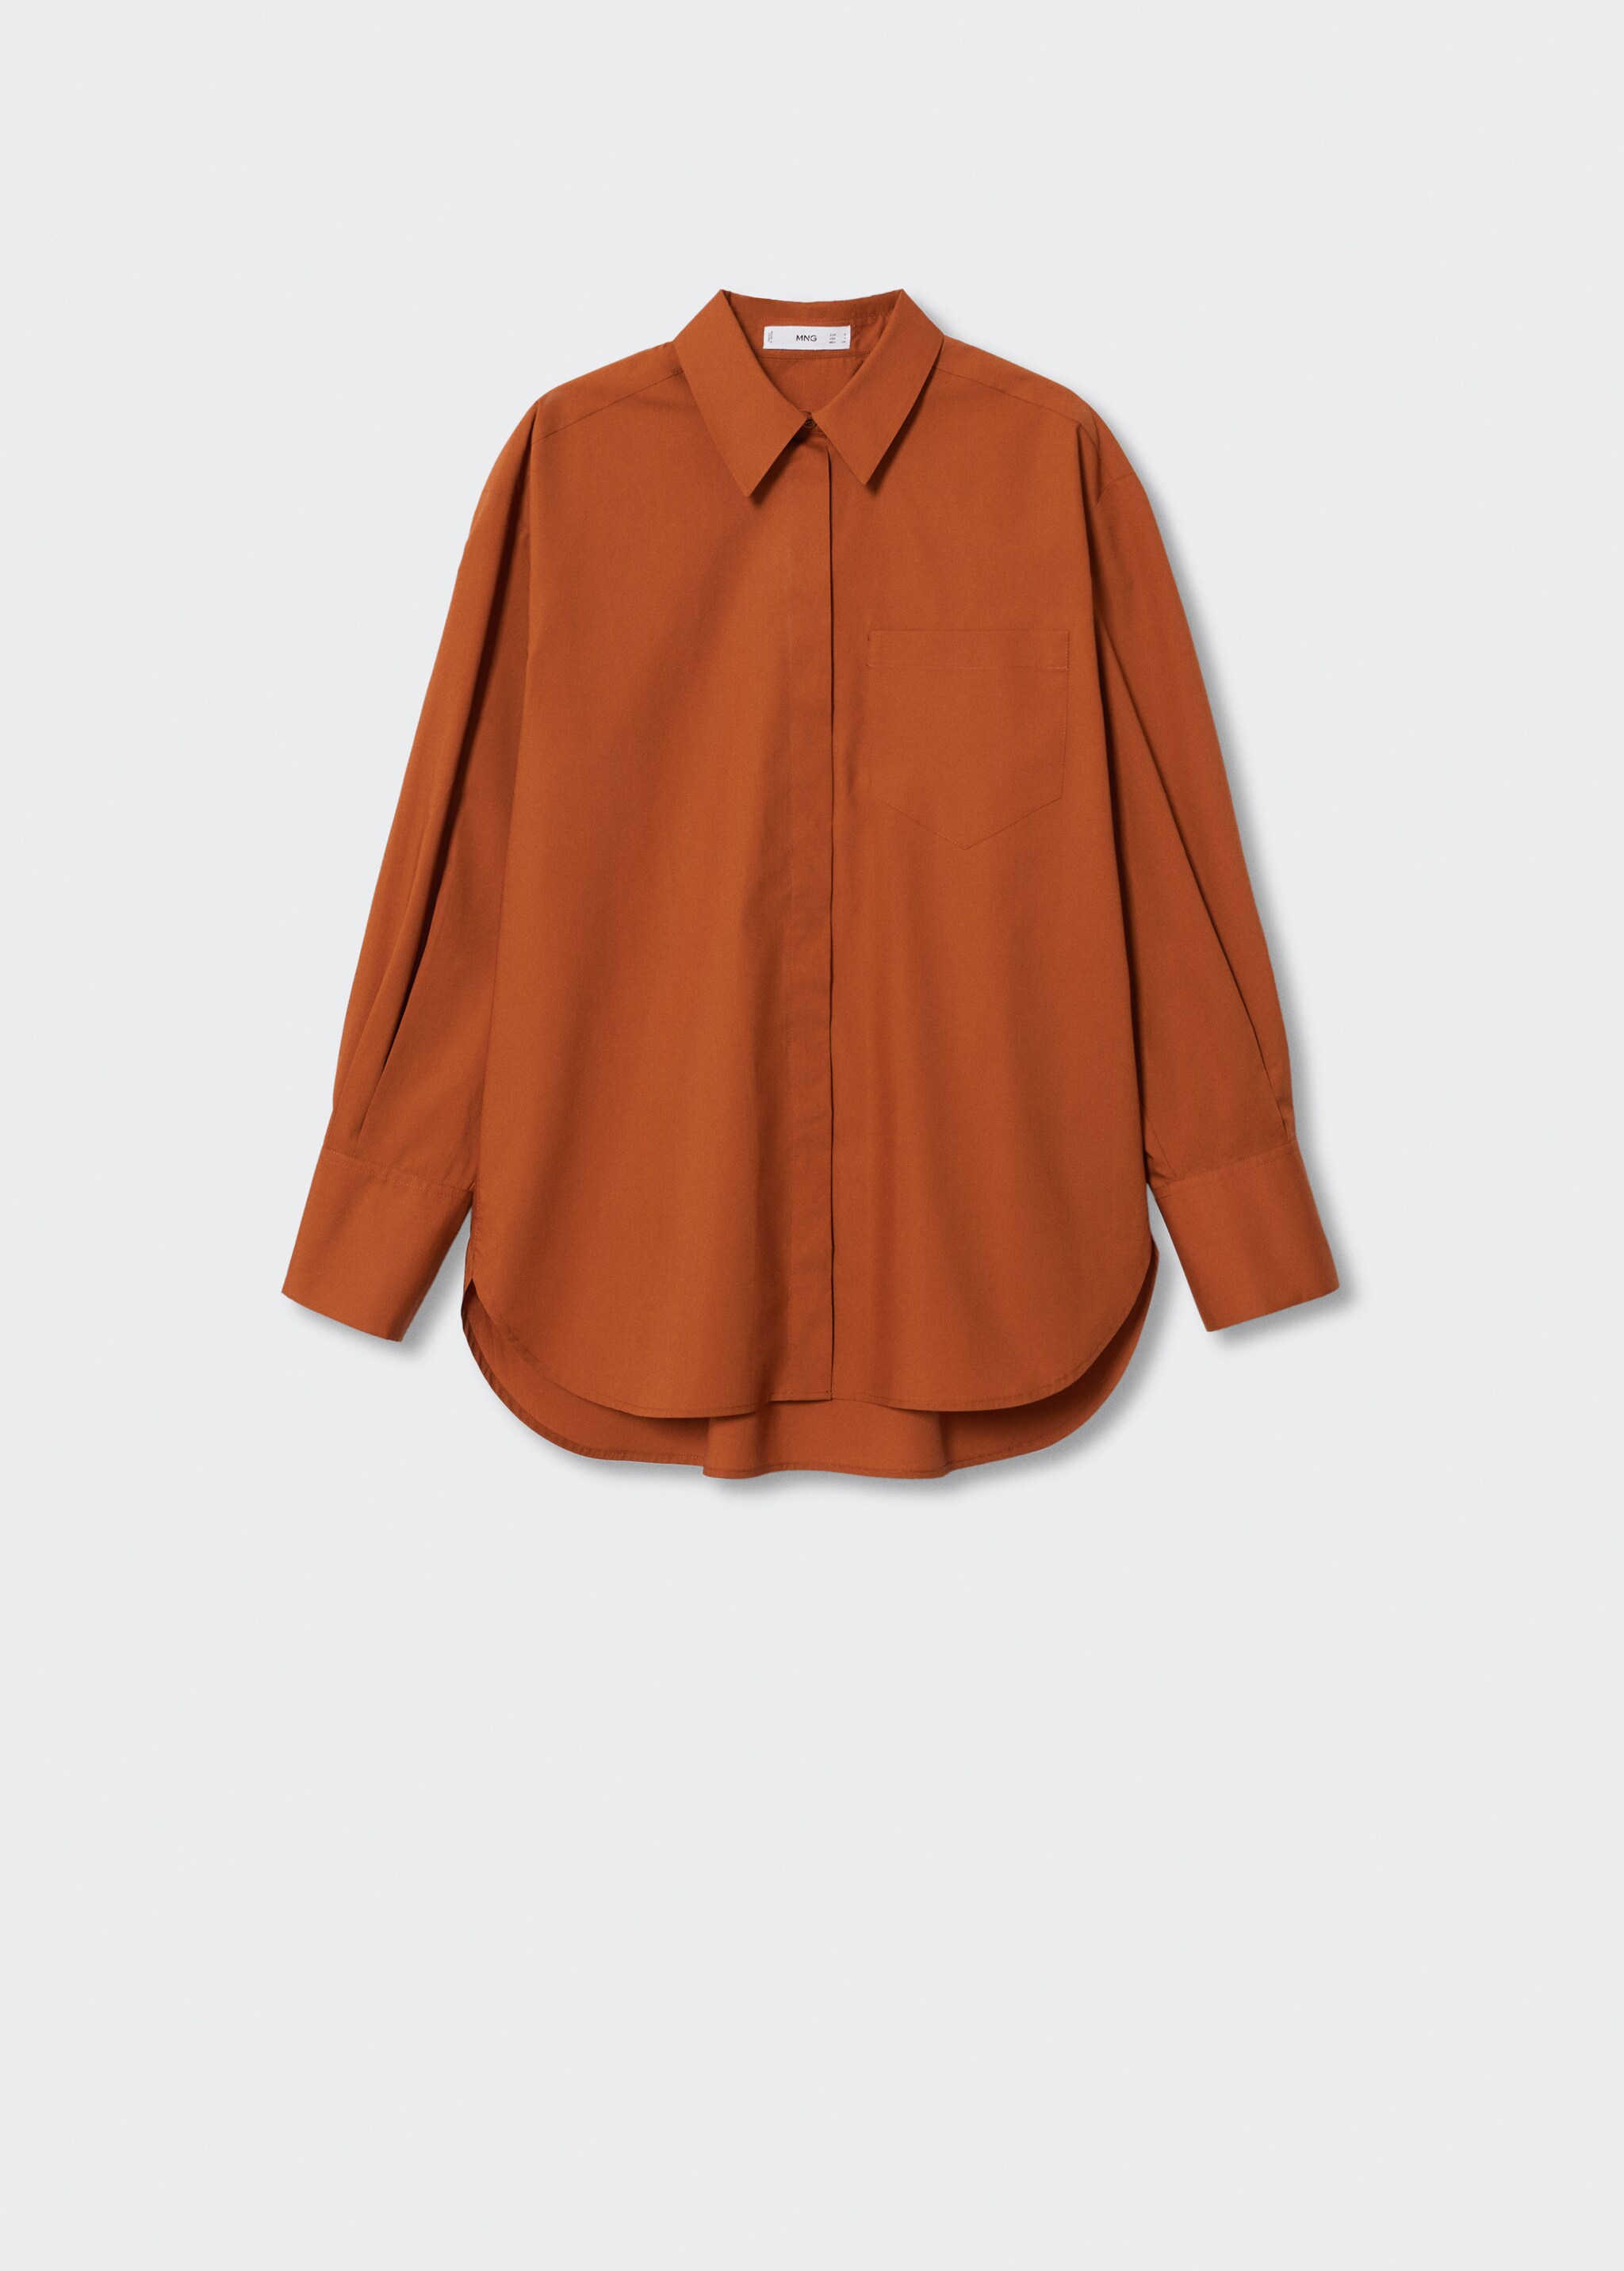 Oversize cotton shirt - Article without model